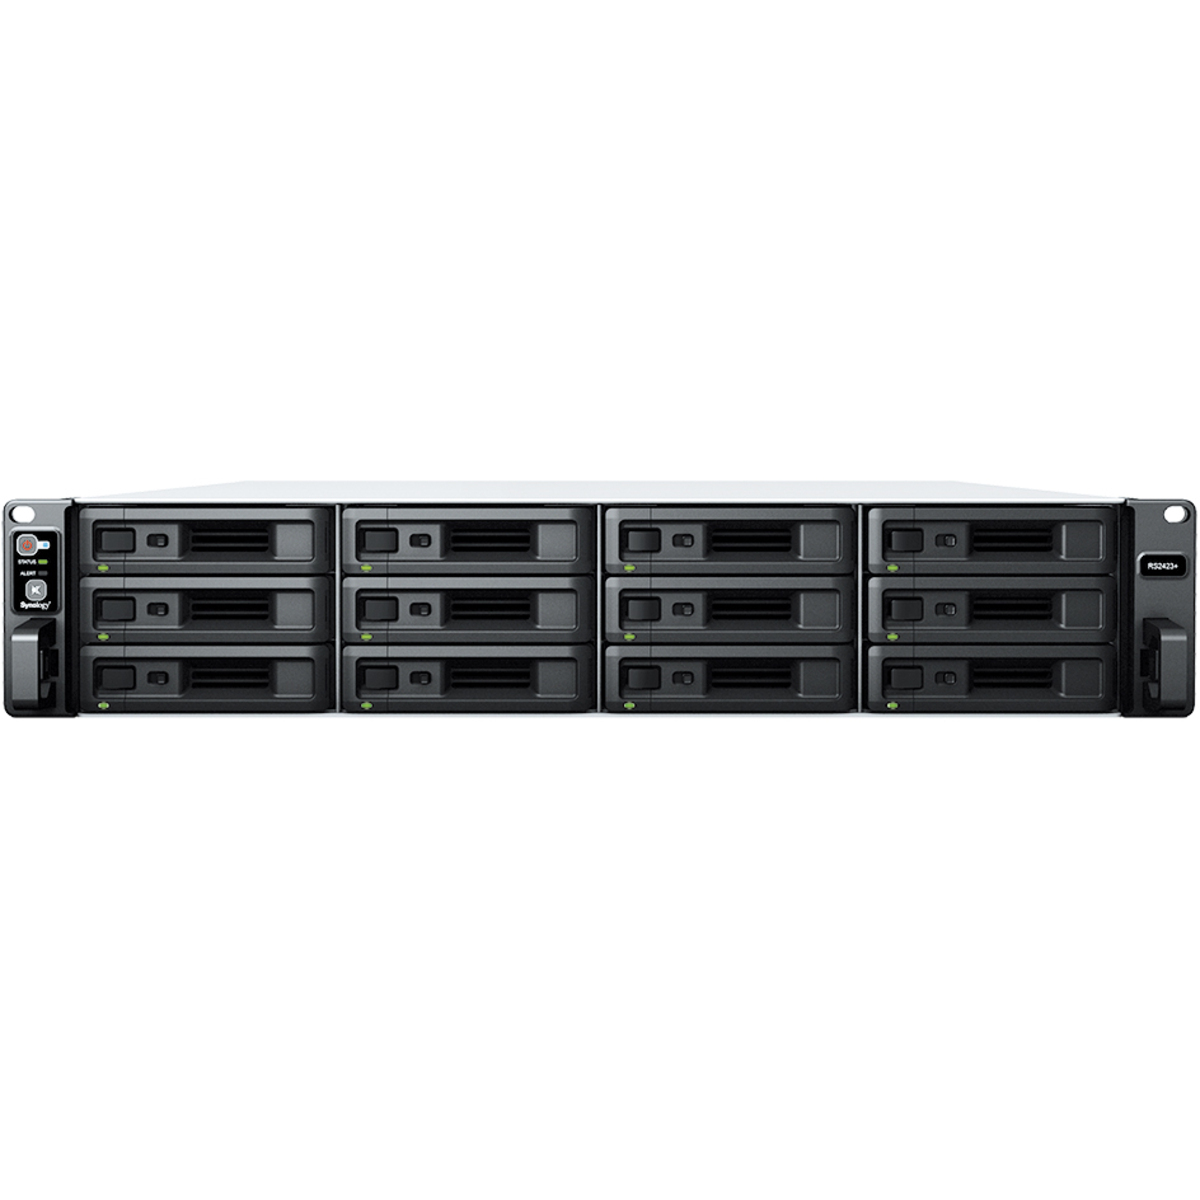 Synology RackStation RS2423RP+ 110tb 12-Bay RackMount Multimedia / Power User / Business NAS - Network Attached Storage Device 11x10tb Seagate IronWolf Pro ST10000NT001 3.5 7200rpm SATA 6Gb/s HDD NAS Class Drives Installed - Burn-In Tested - ON SALE - FREE RAM UPGRADE RackStation RS2423RP+